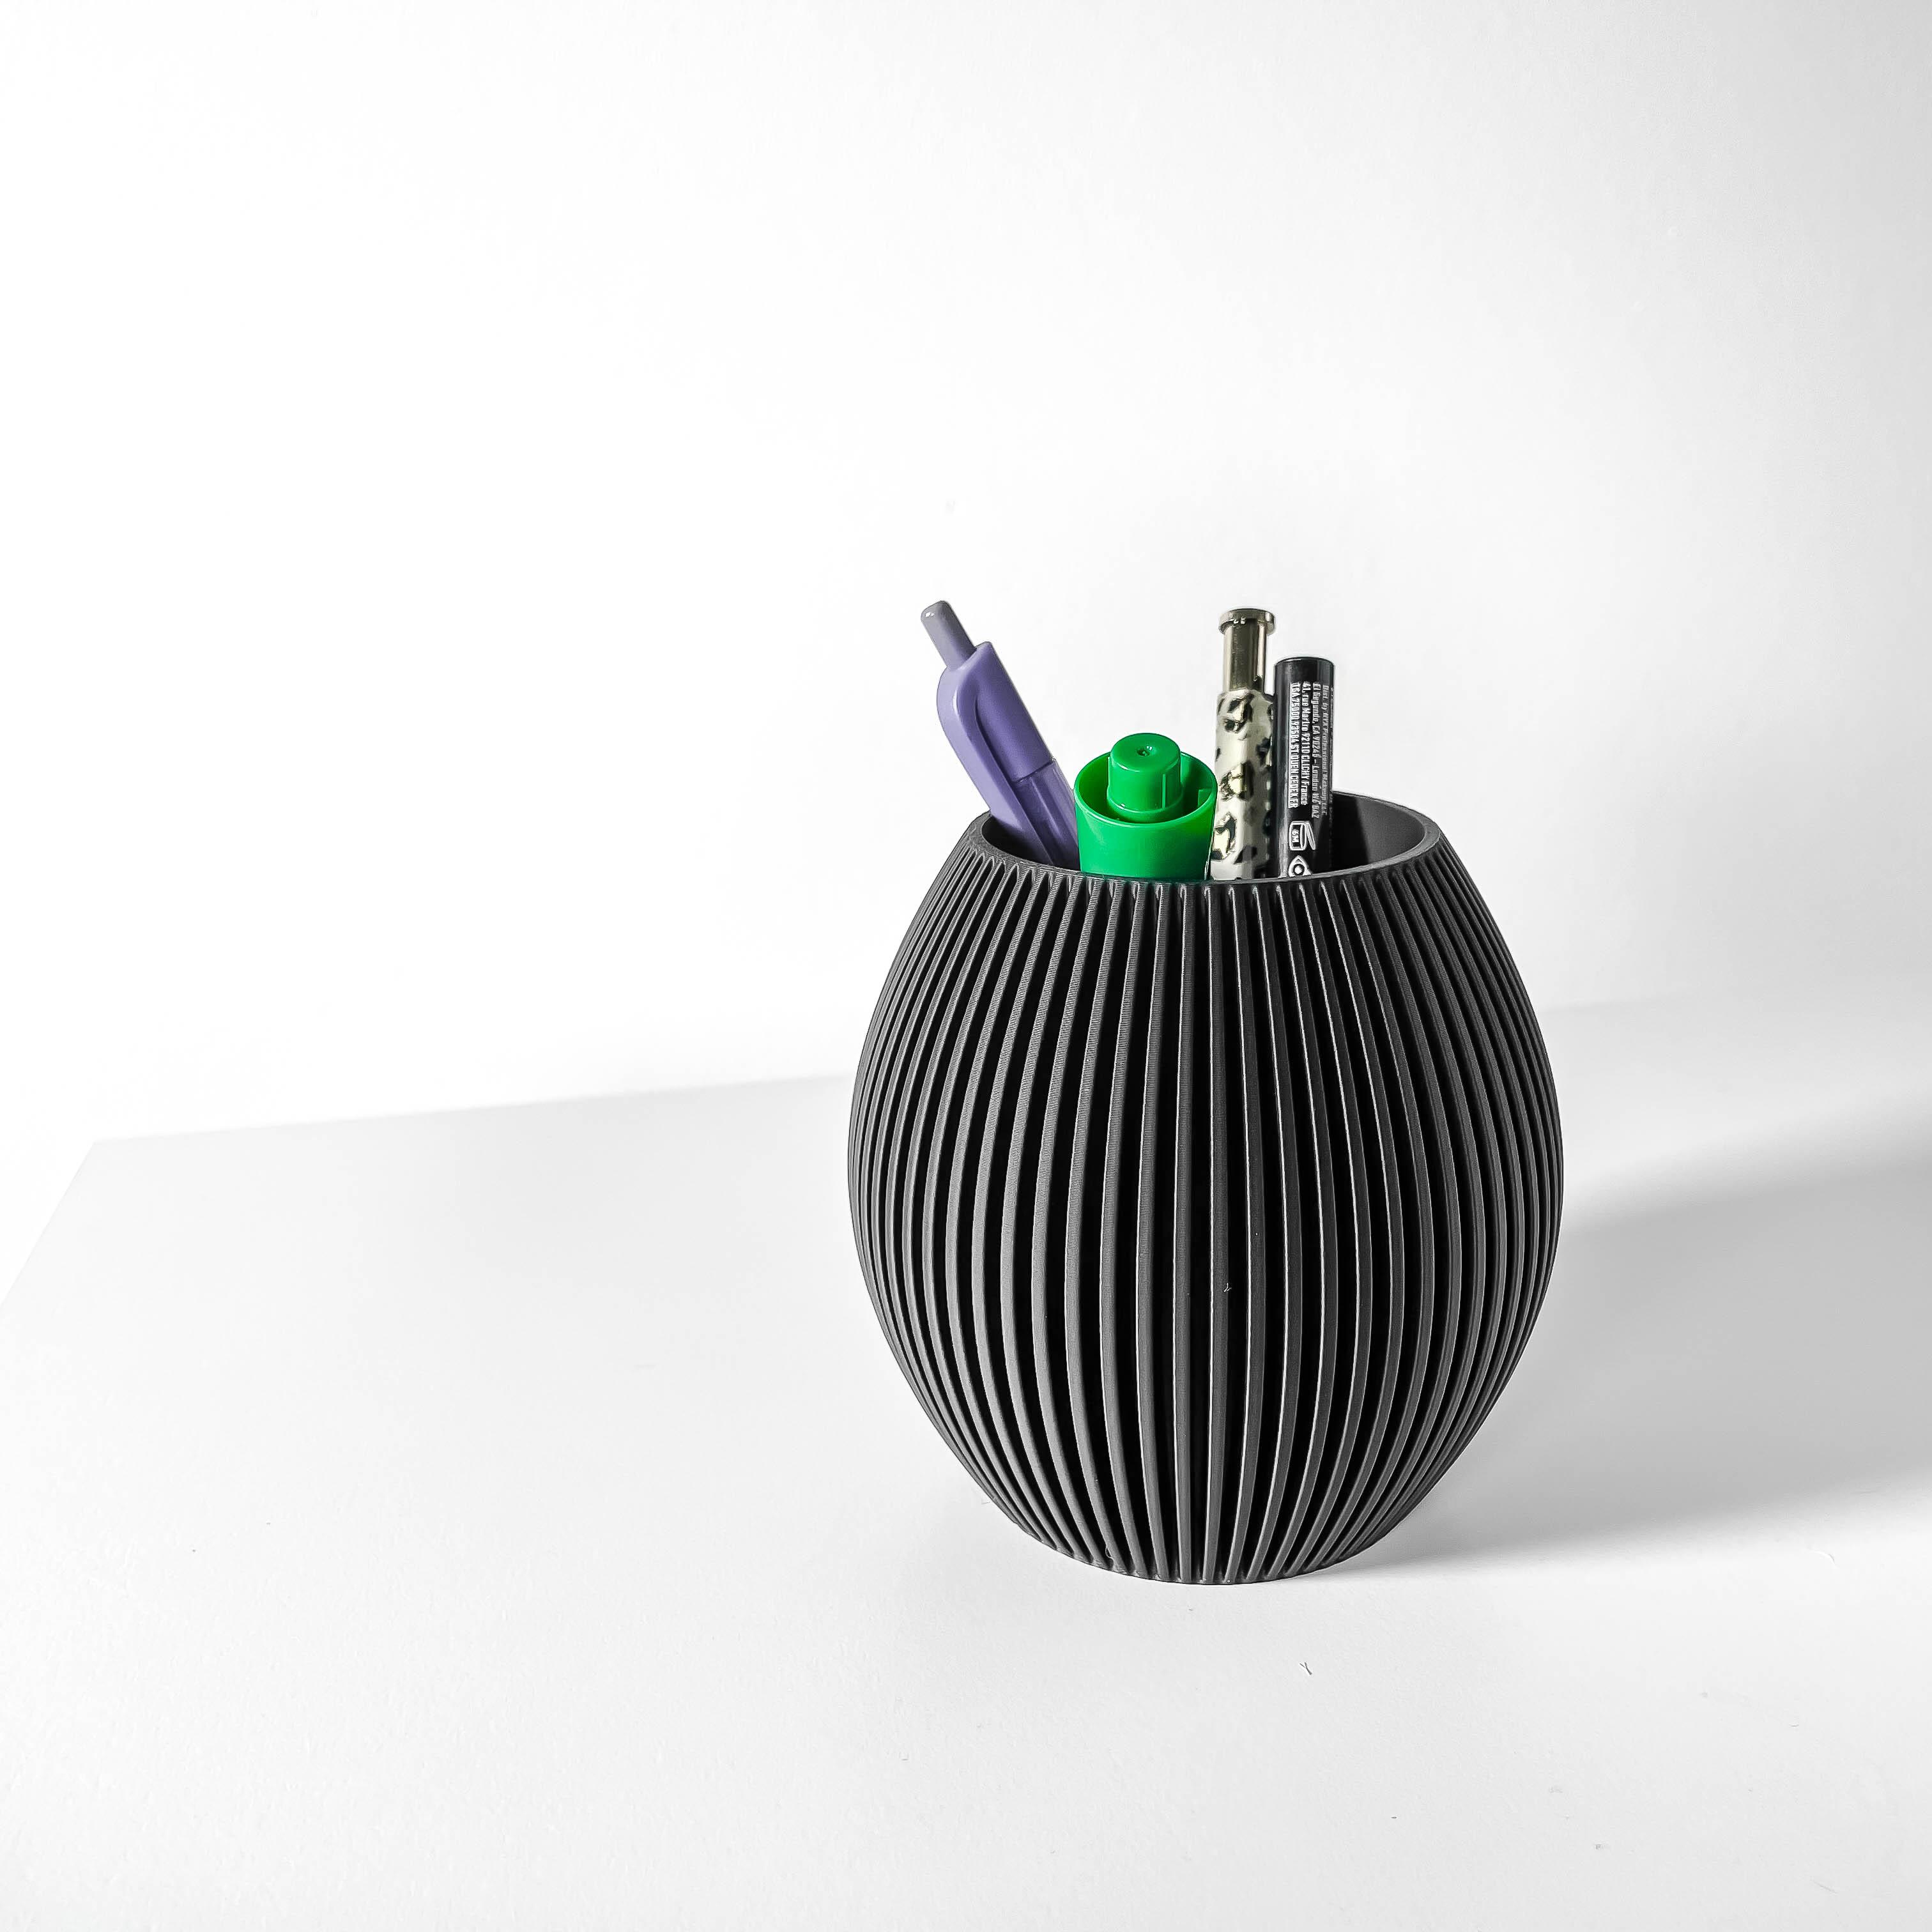 The Renis Pen Holder | Desk Organizer and Pencil Cup Holder | Modern Office and Home Decor 3d model